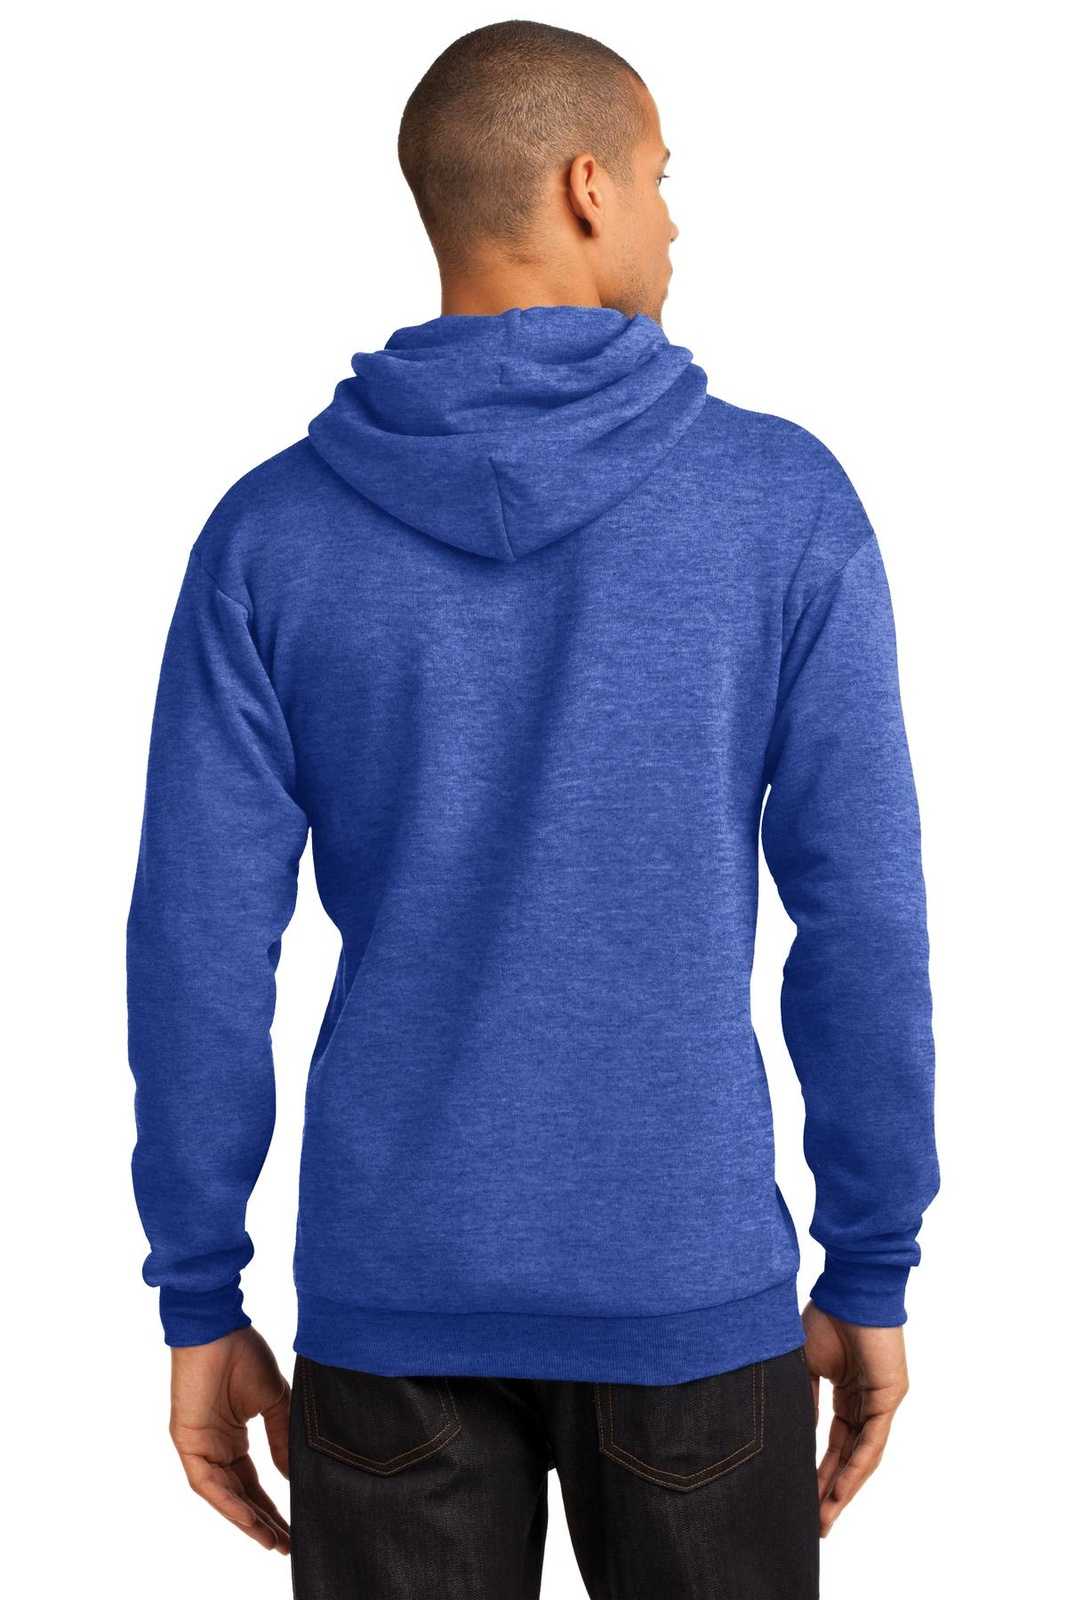 Port & Company PC78H Core Fleece Pullover Hooded Sweatshirt - Heather Royal - HIT a Double - 1